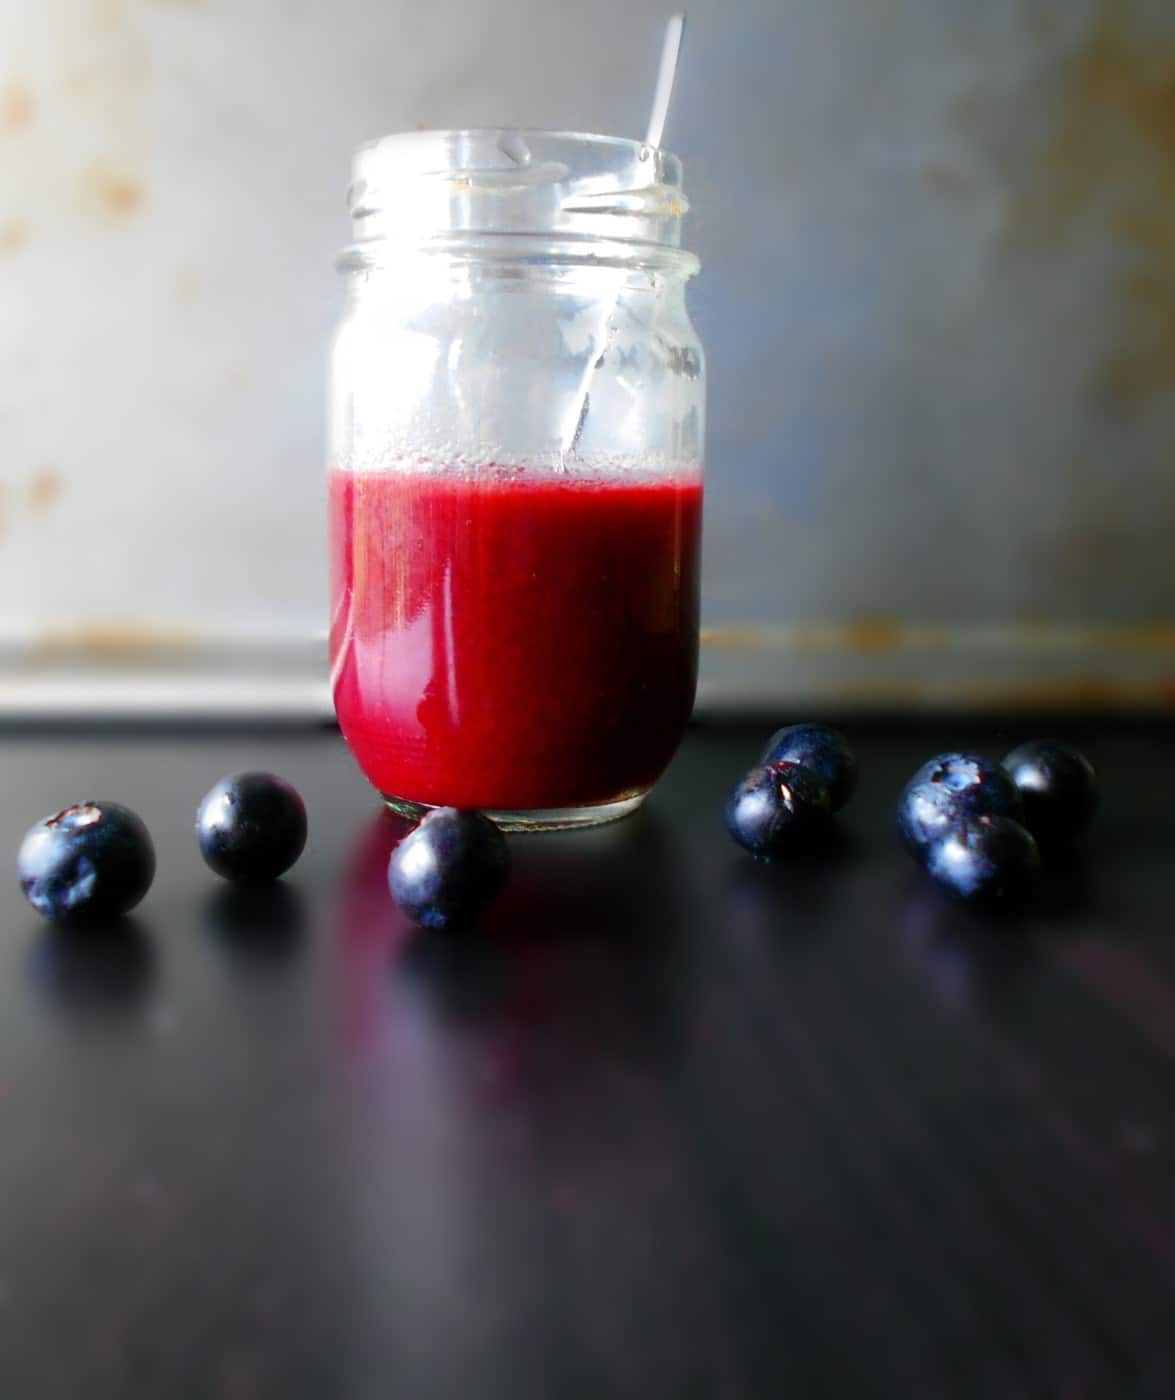 Front view of blueberry vinaigrette in a glass bottel with blueberry around